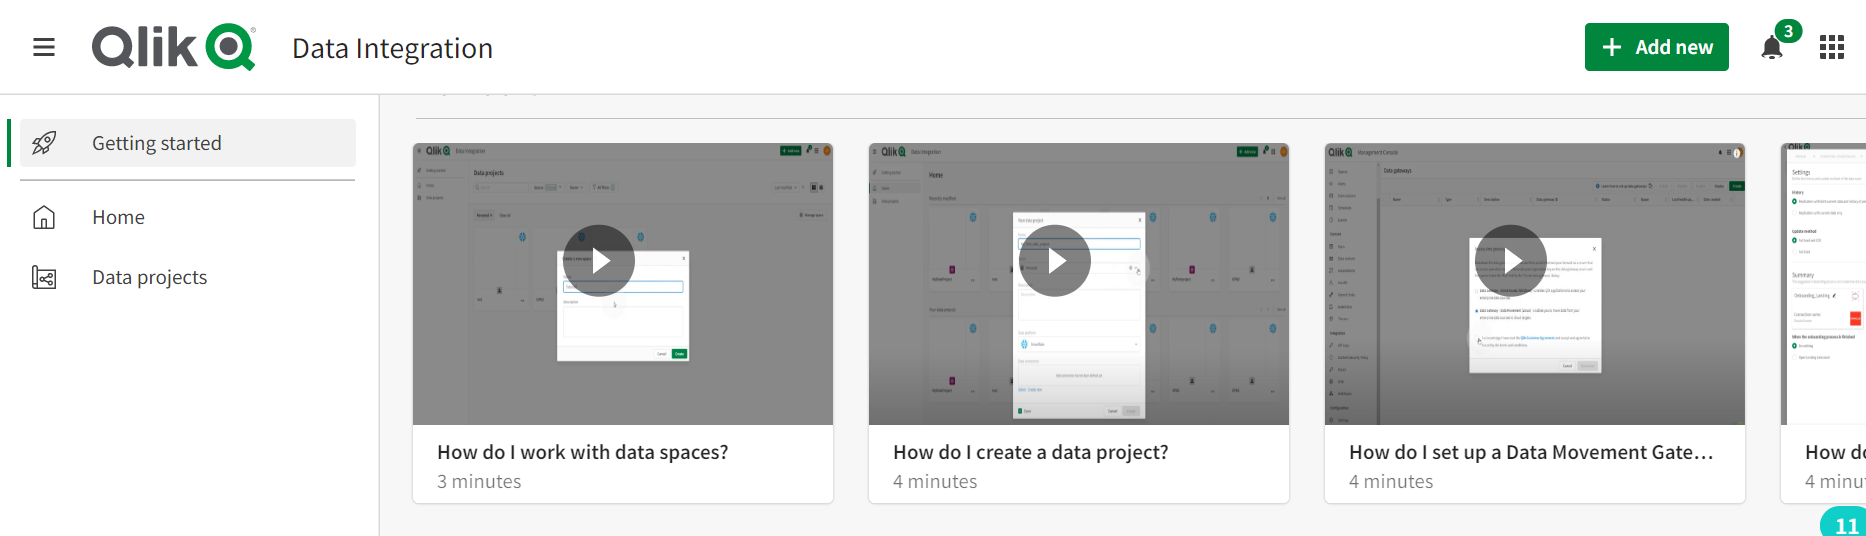 Screenshot of the Qlik Cloud hub with videos explaining how to use different features of Data Integration. 